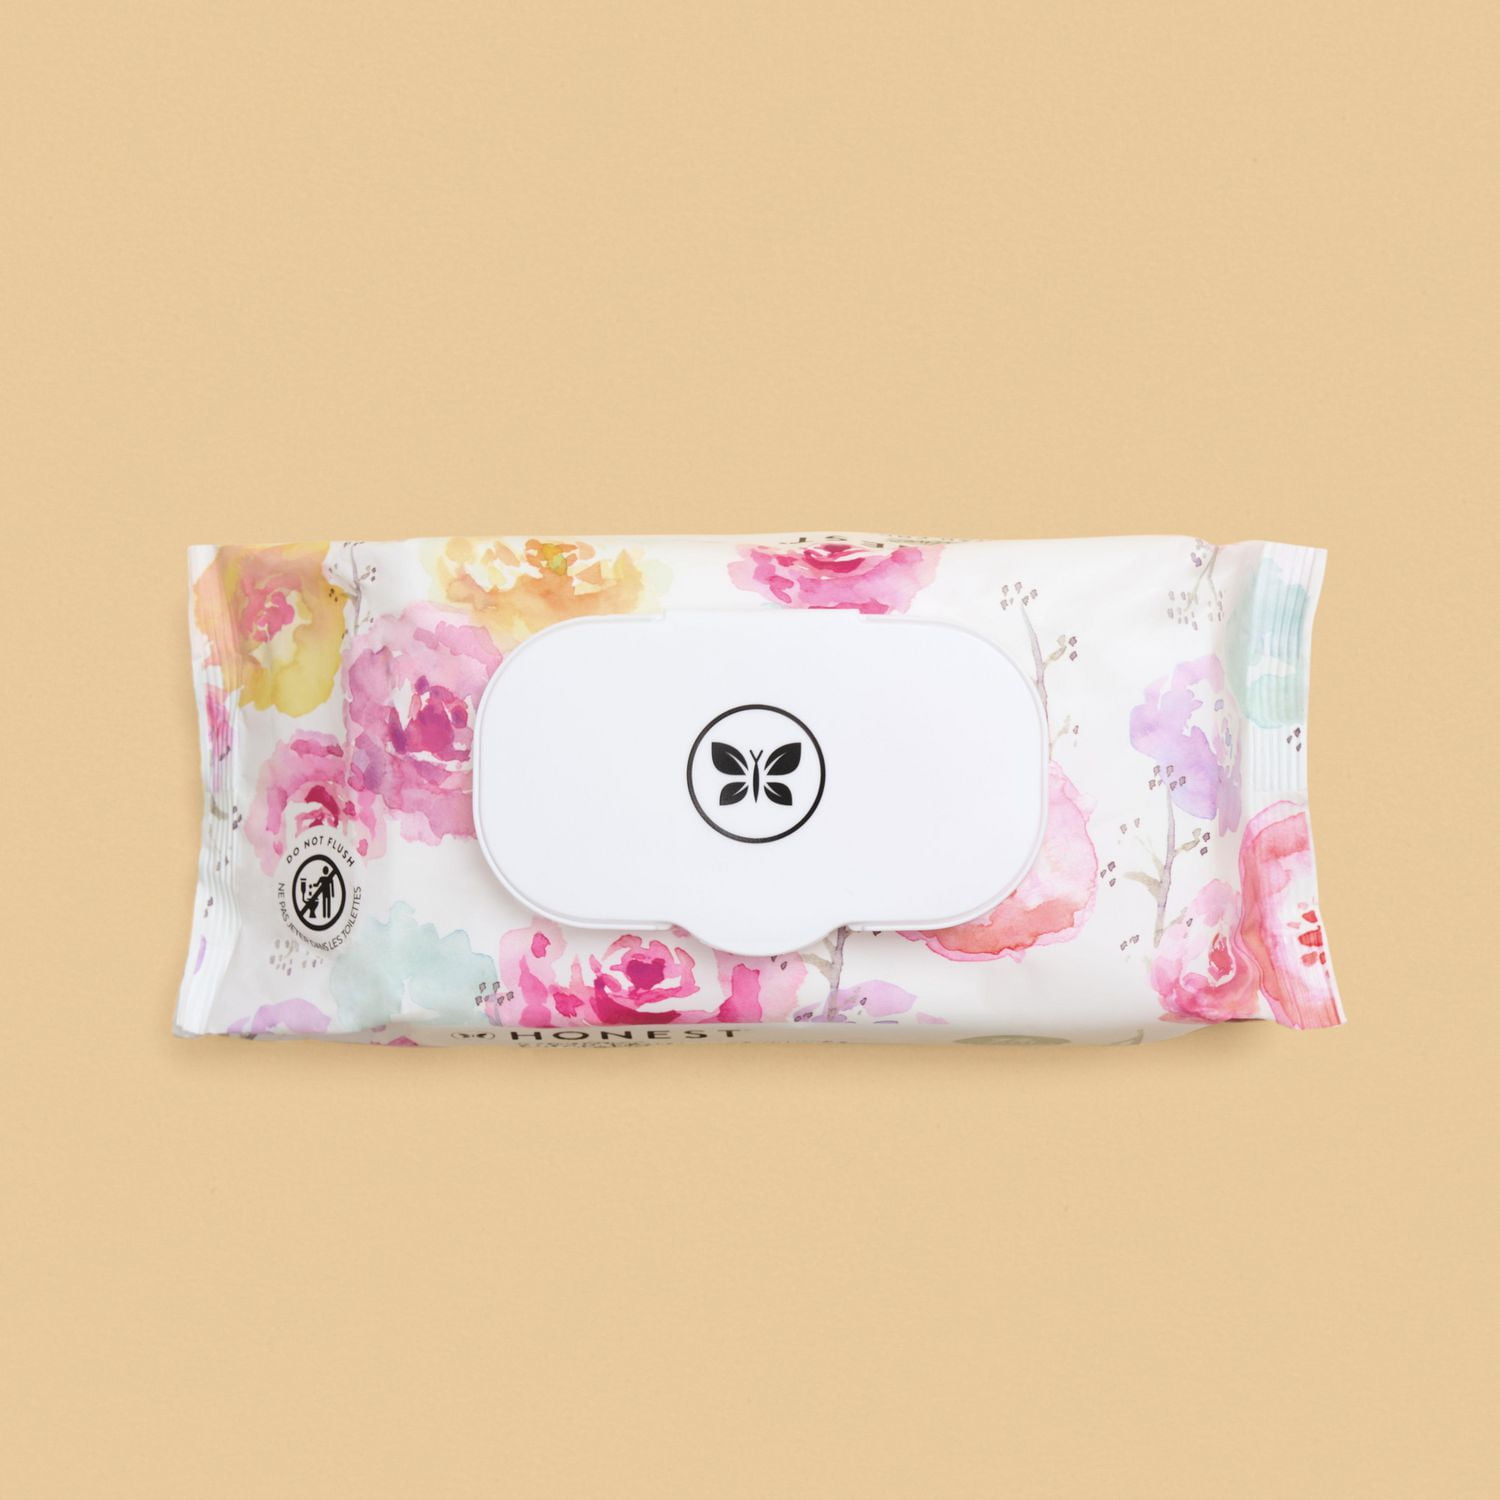 The Honest Company - Baby Wipes - Rose Blossom - 72 Count